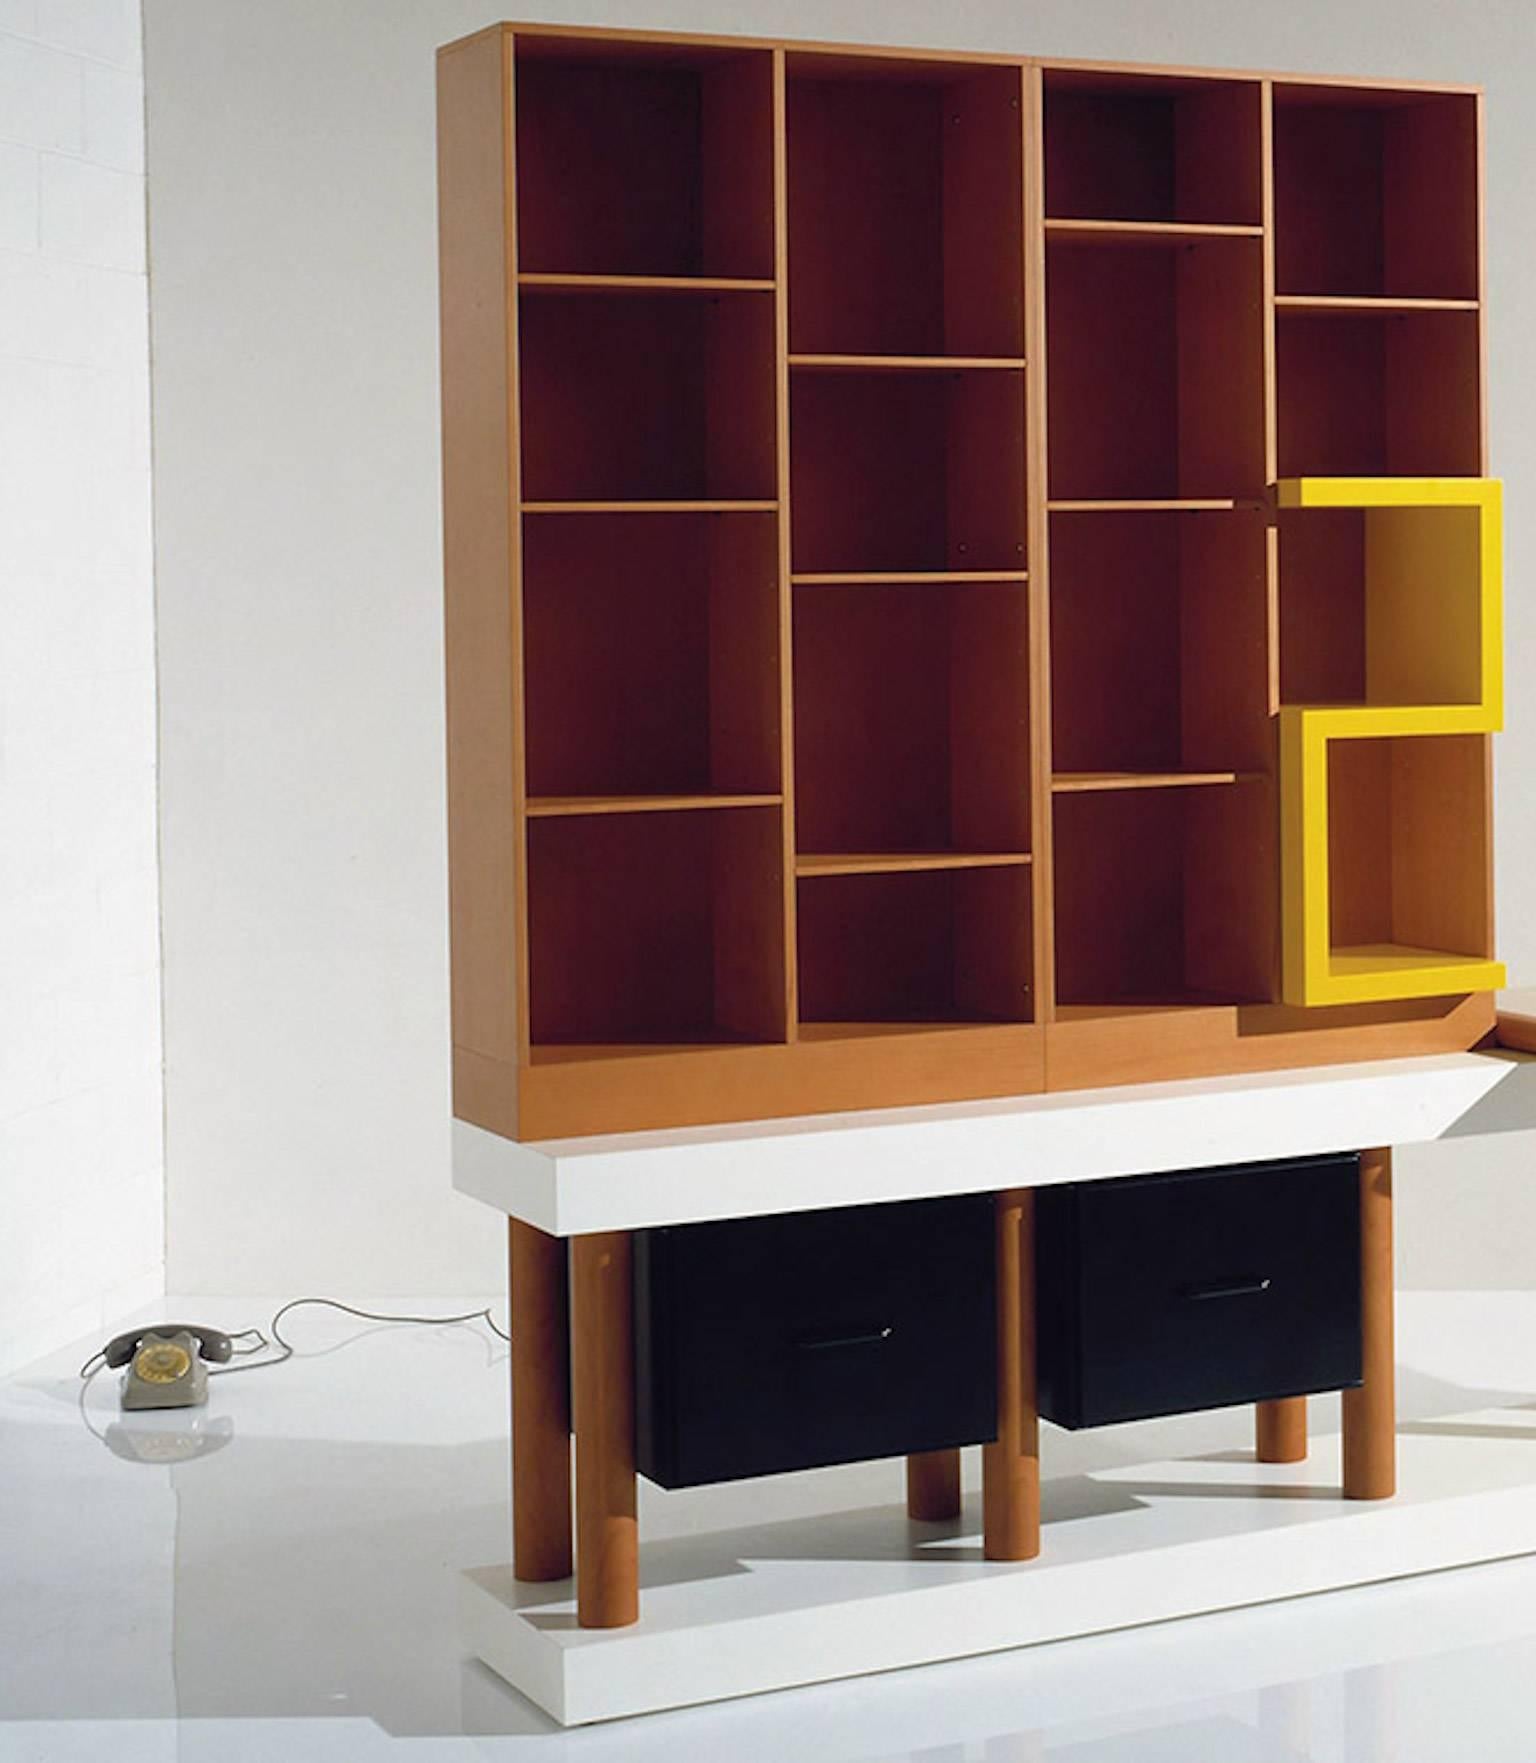 Cabinet consisting of a laminate base with one pear-shaped legs and two black lacquered drawers, upper part with pear-shaped open elements with shelves and yellow lacquered objects and pear-shaped top. Limited edition of 20 copies. Out production.